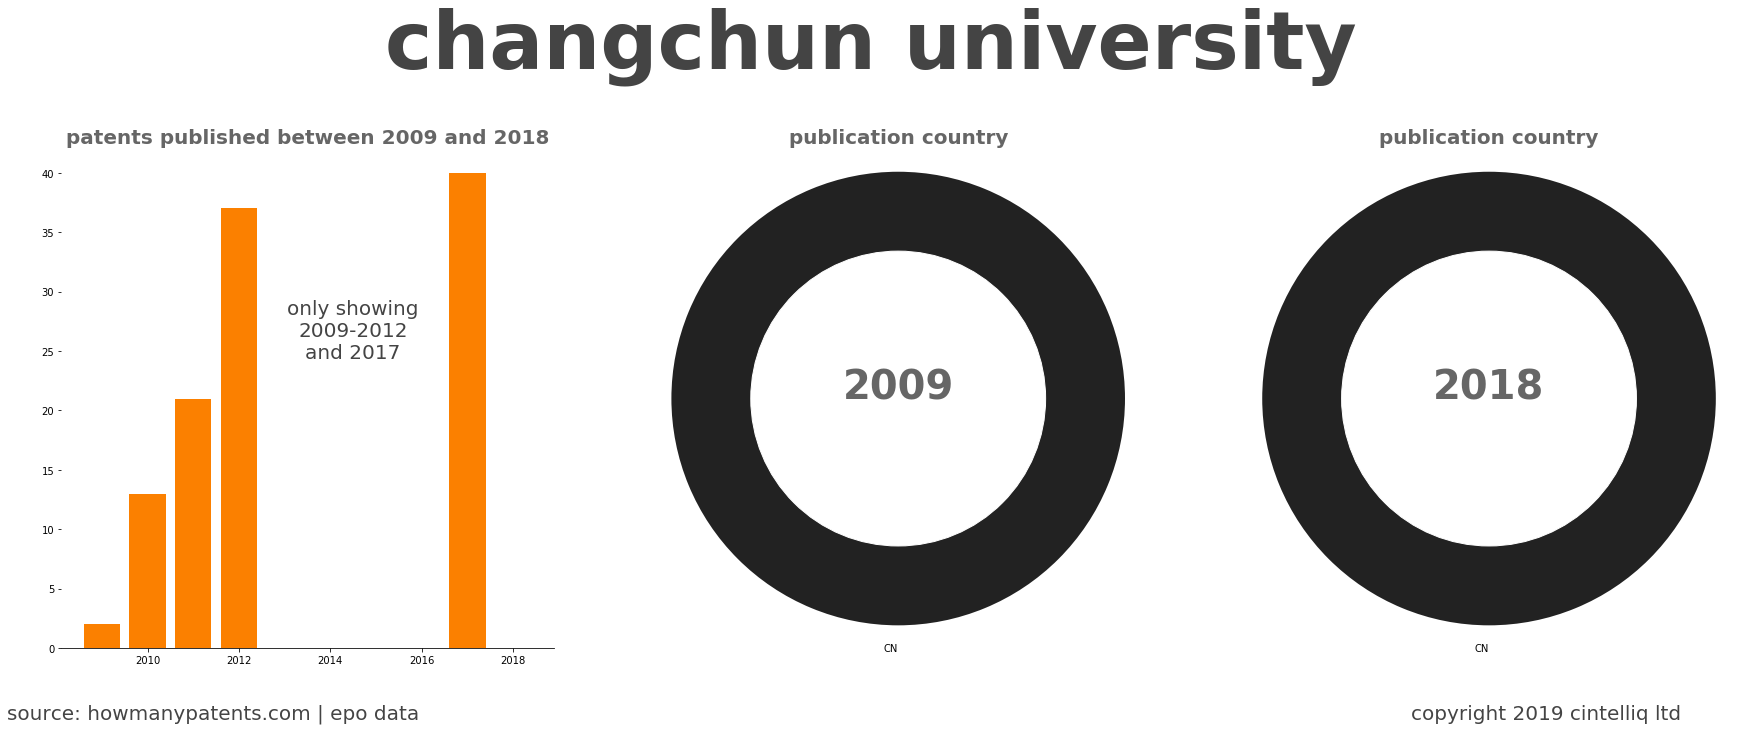 summary of patents for Changchun University